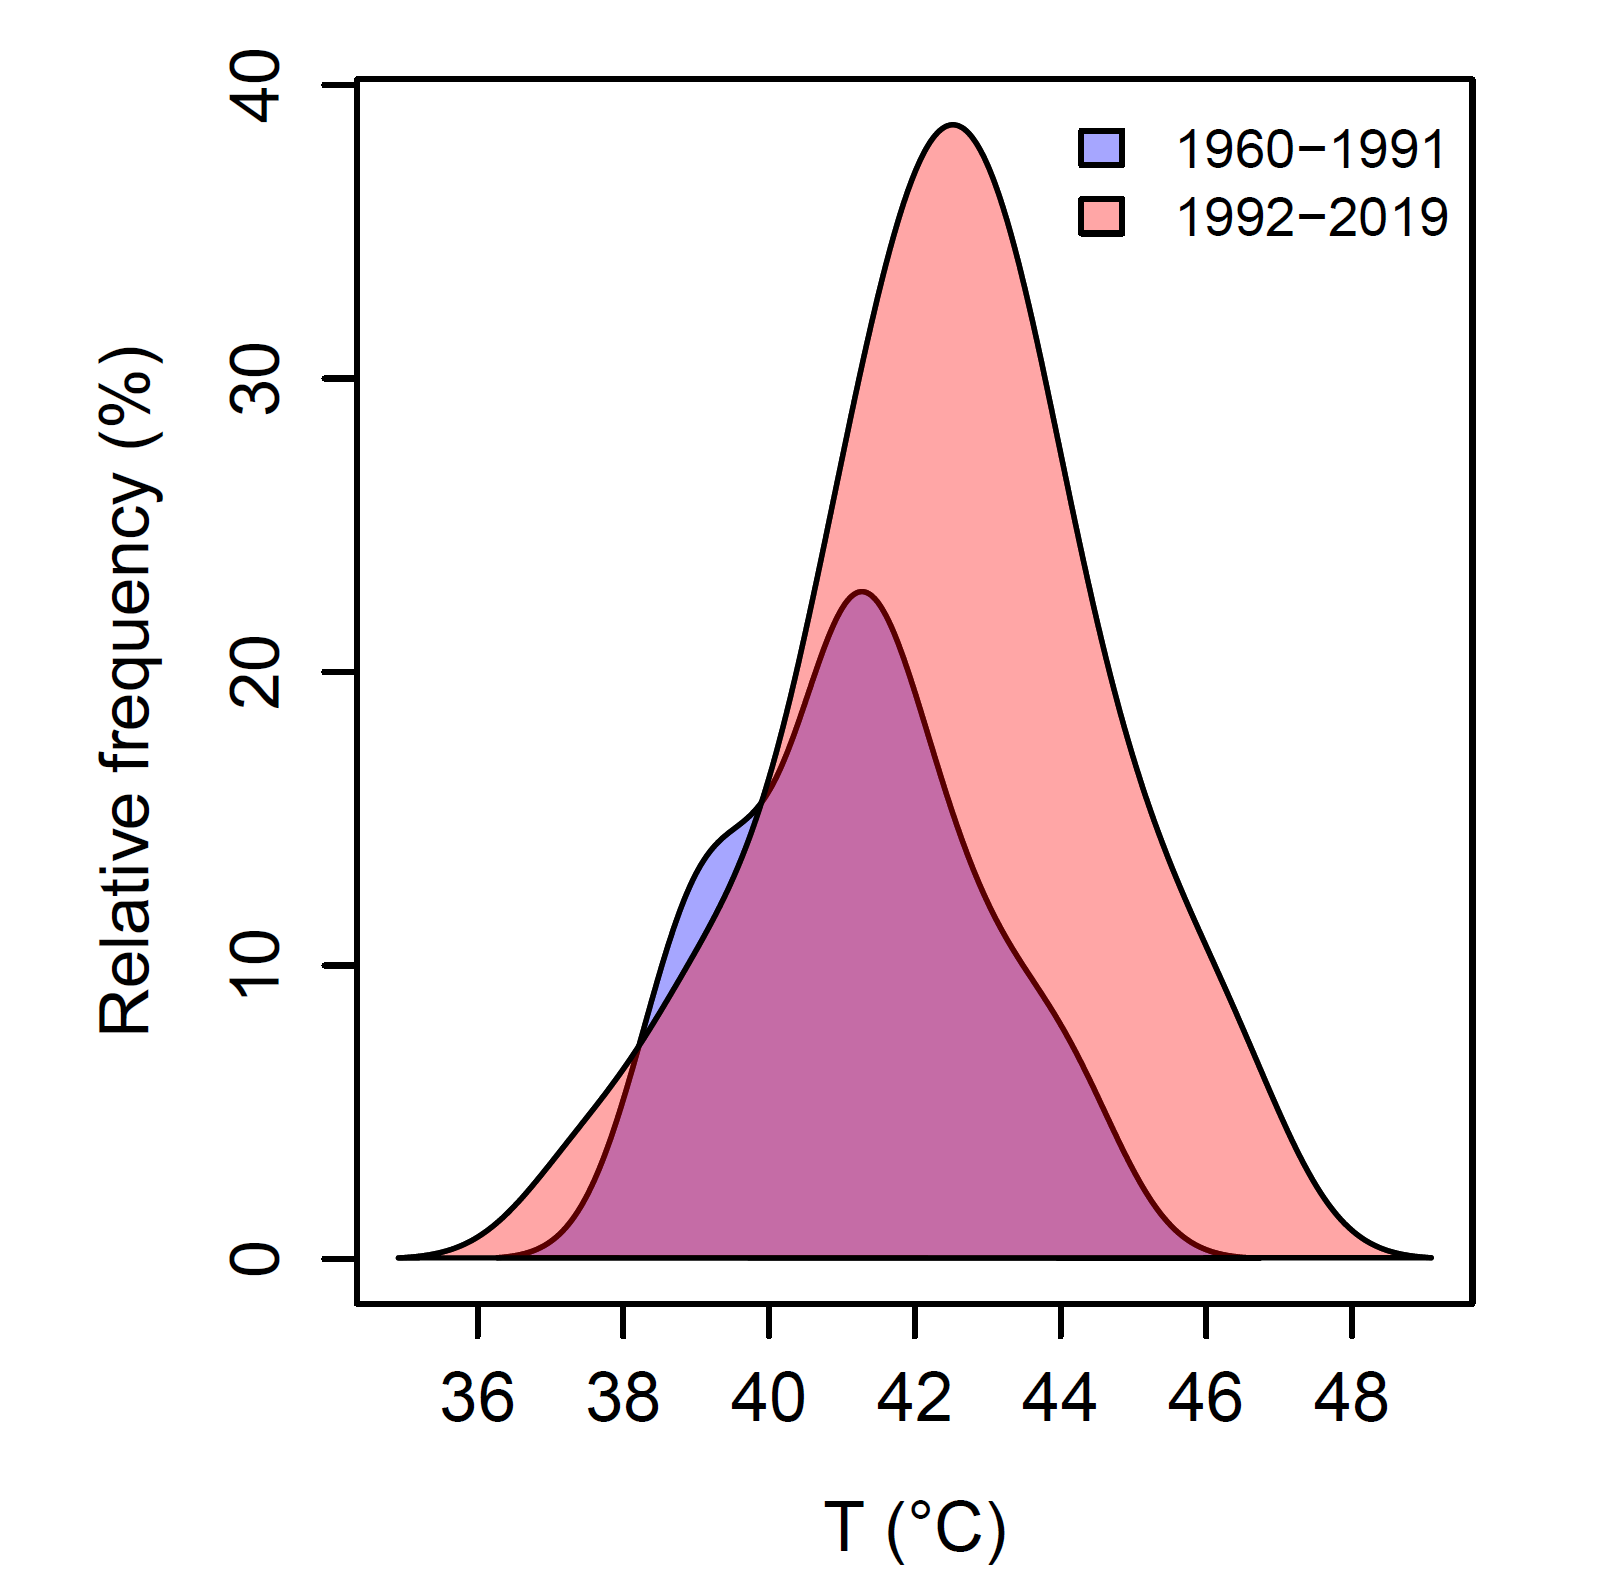 This line graph shows probability distributions of daily maximum temperature extremes for Gulargambone for two periods, namely 1960 to 1991 and 1992 to 2019.